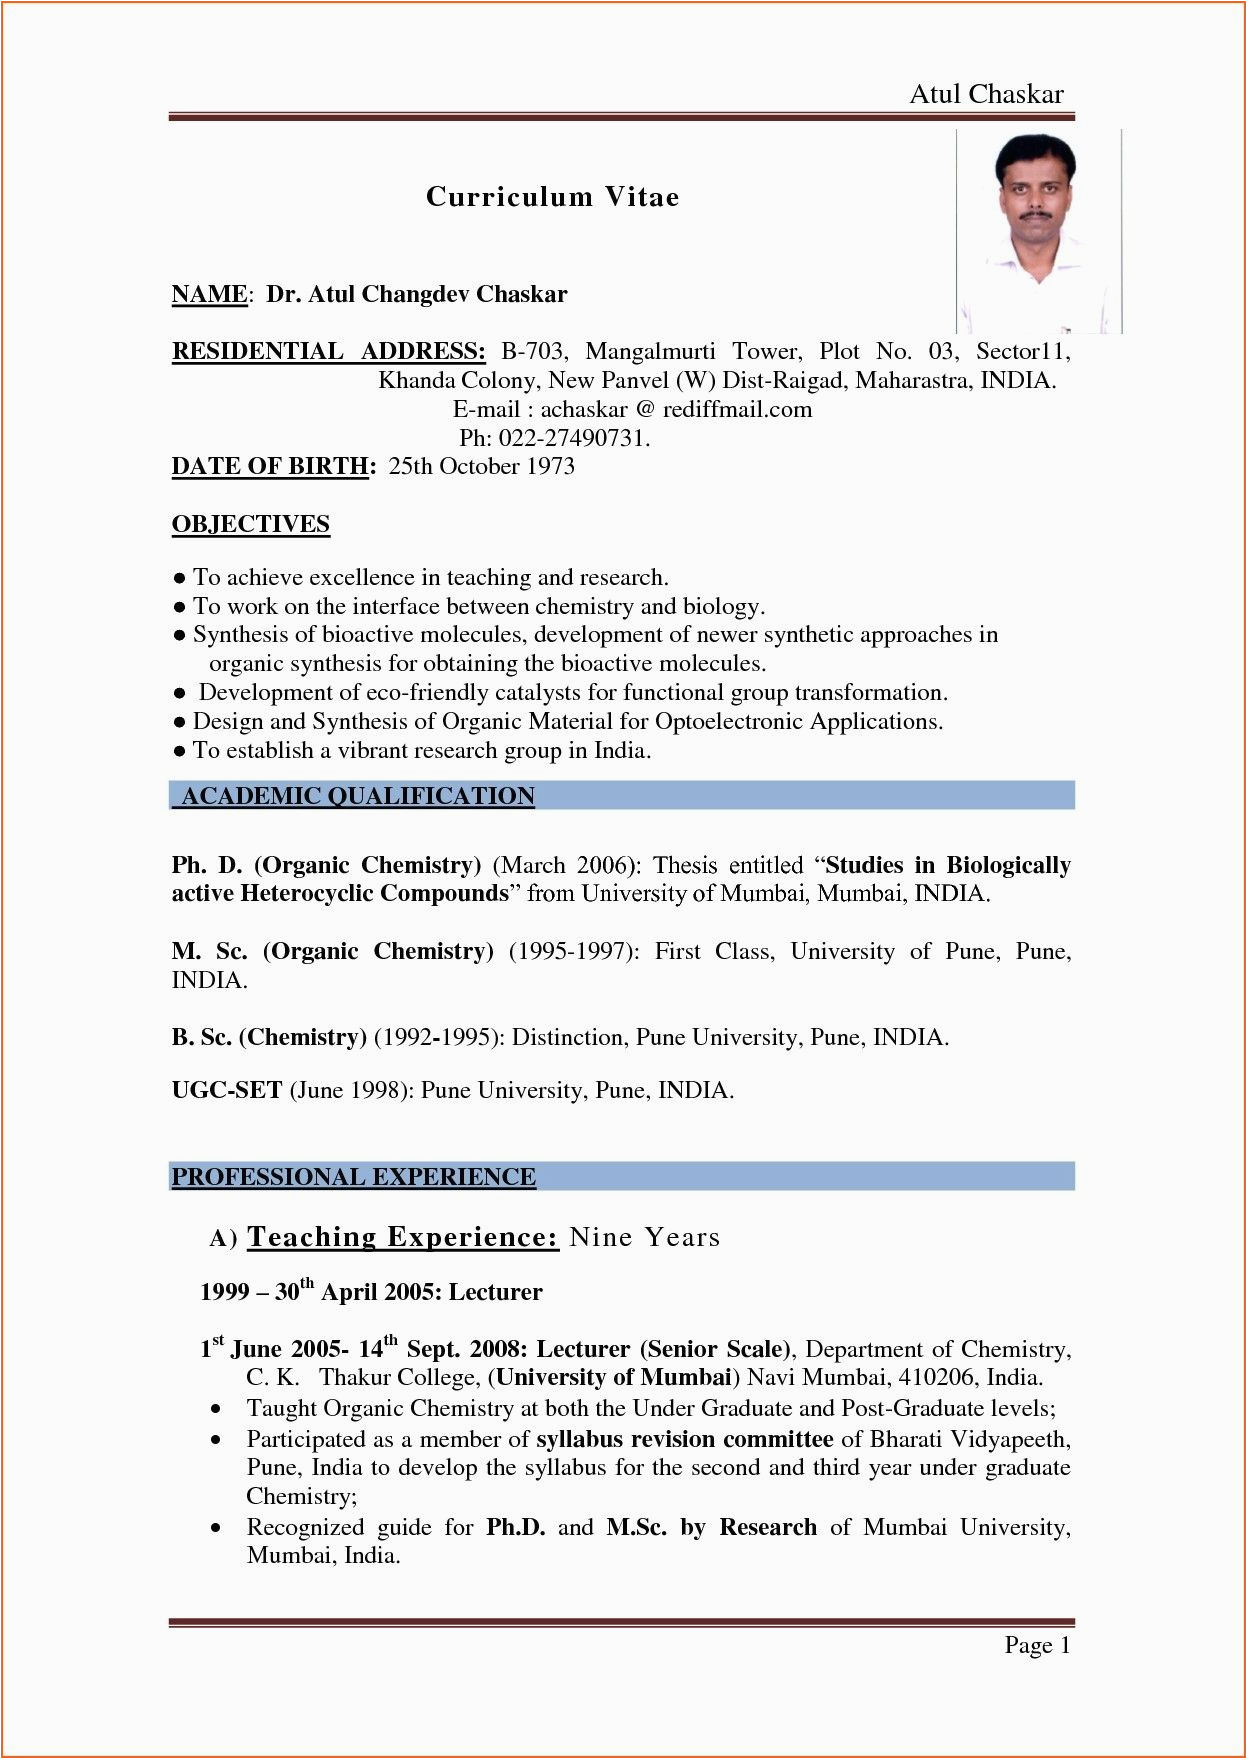 Sample Resume for Teaching Position In India Cv Samples for Teachers In India 15 top Teacher Resume Examples